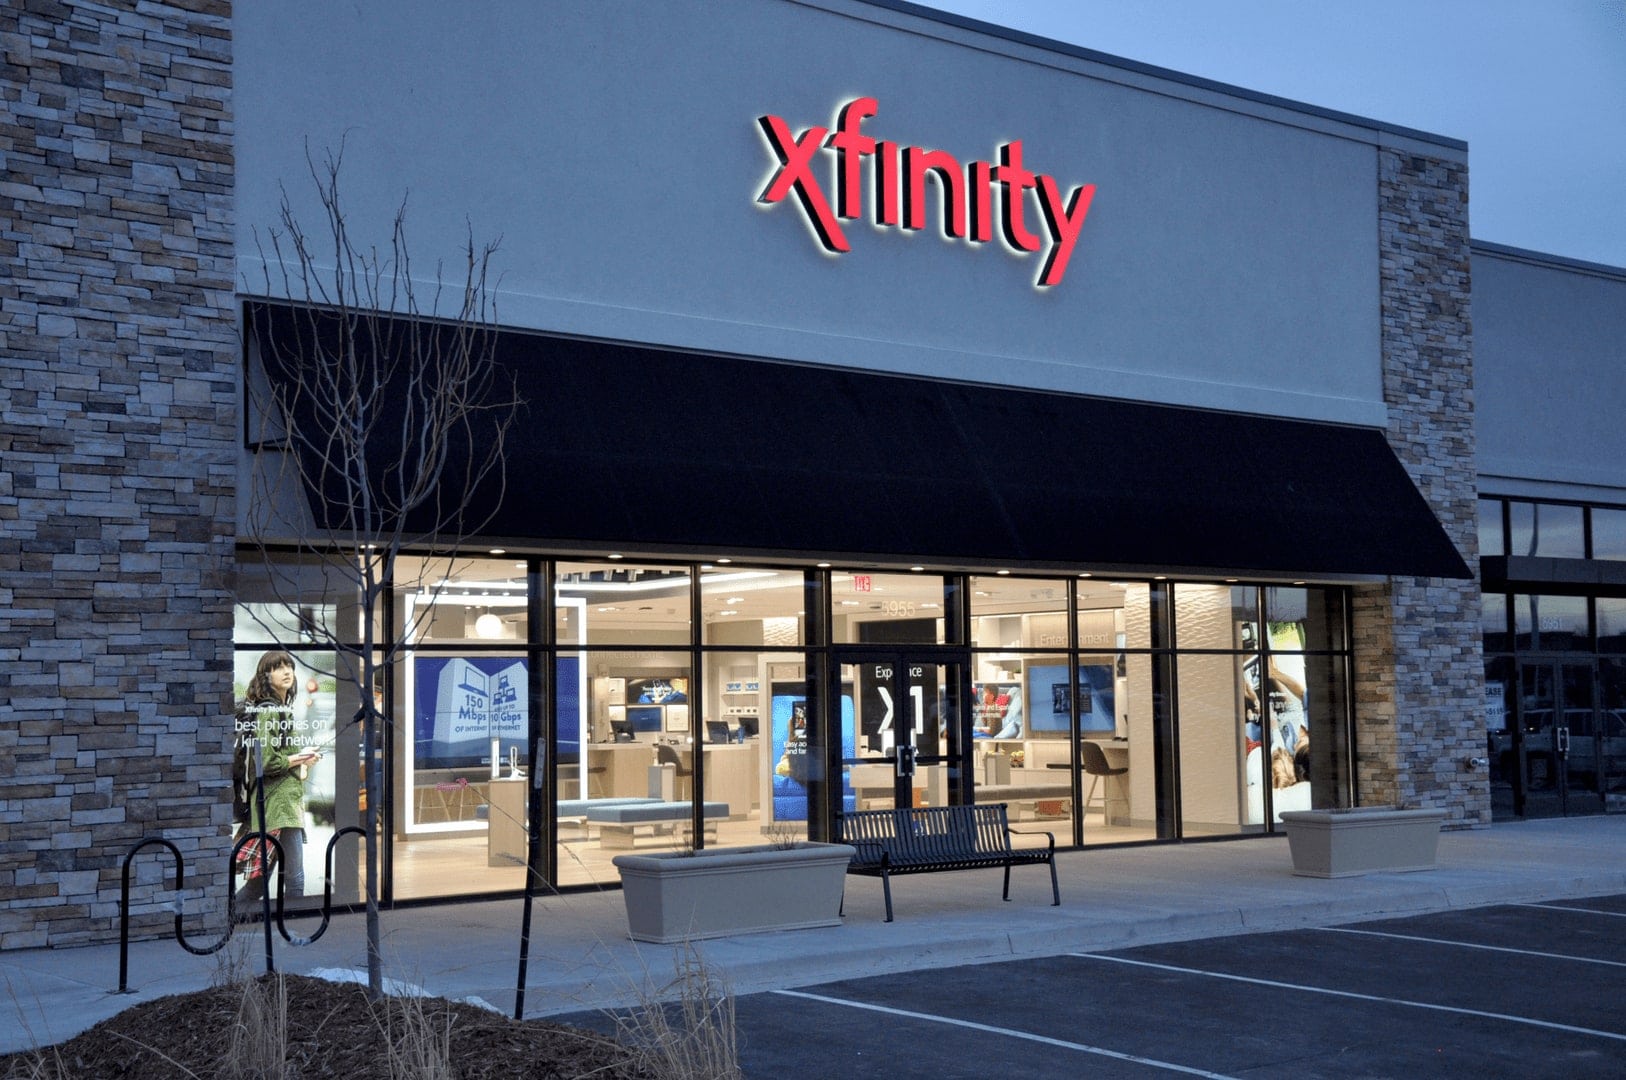 The exterior of an Xfinity Comcast store at night